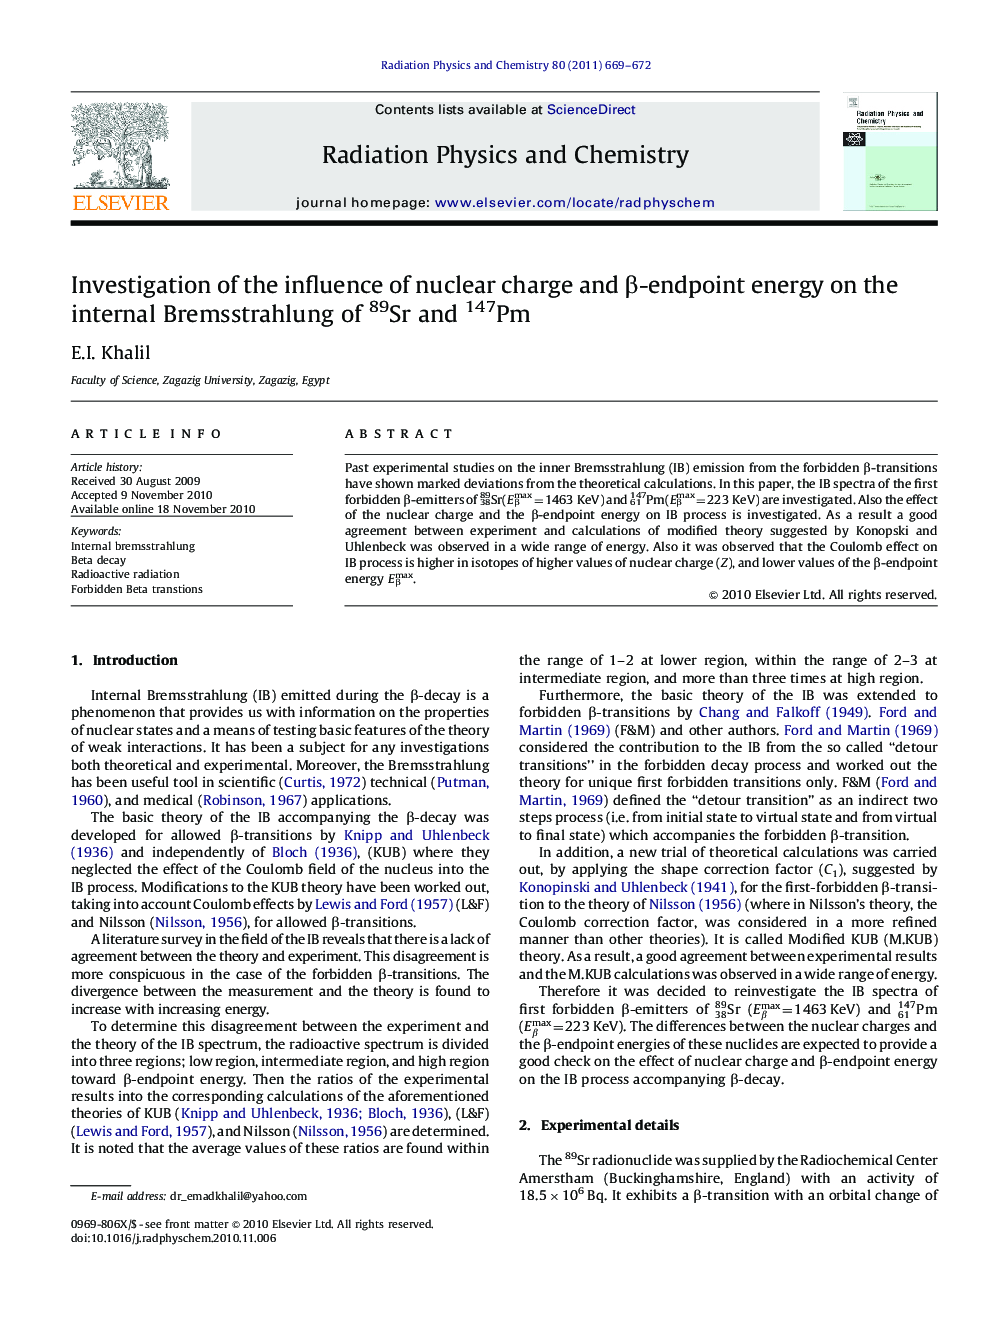 Investigation of the influence of nuclear charge and β-endpoint energy on the internal Bremsstrahlung of 89Sr and 147Pm